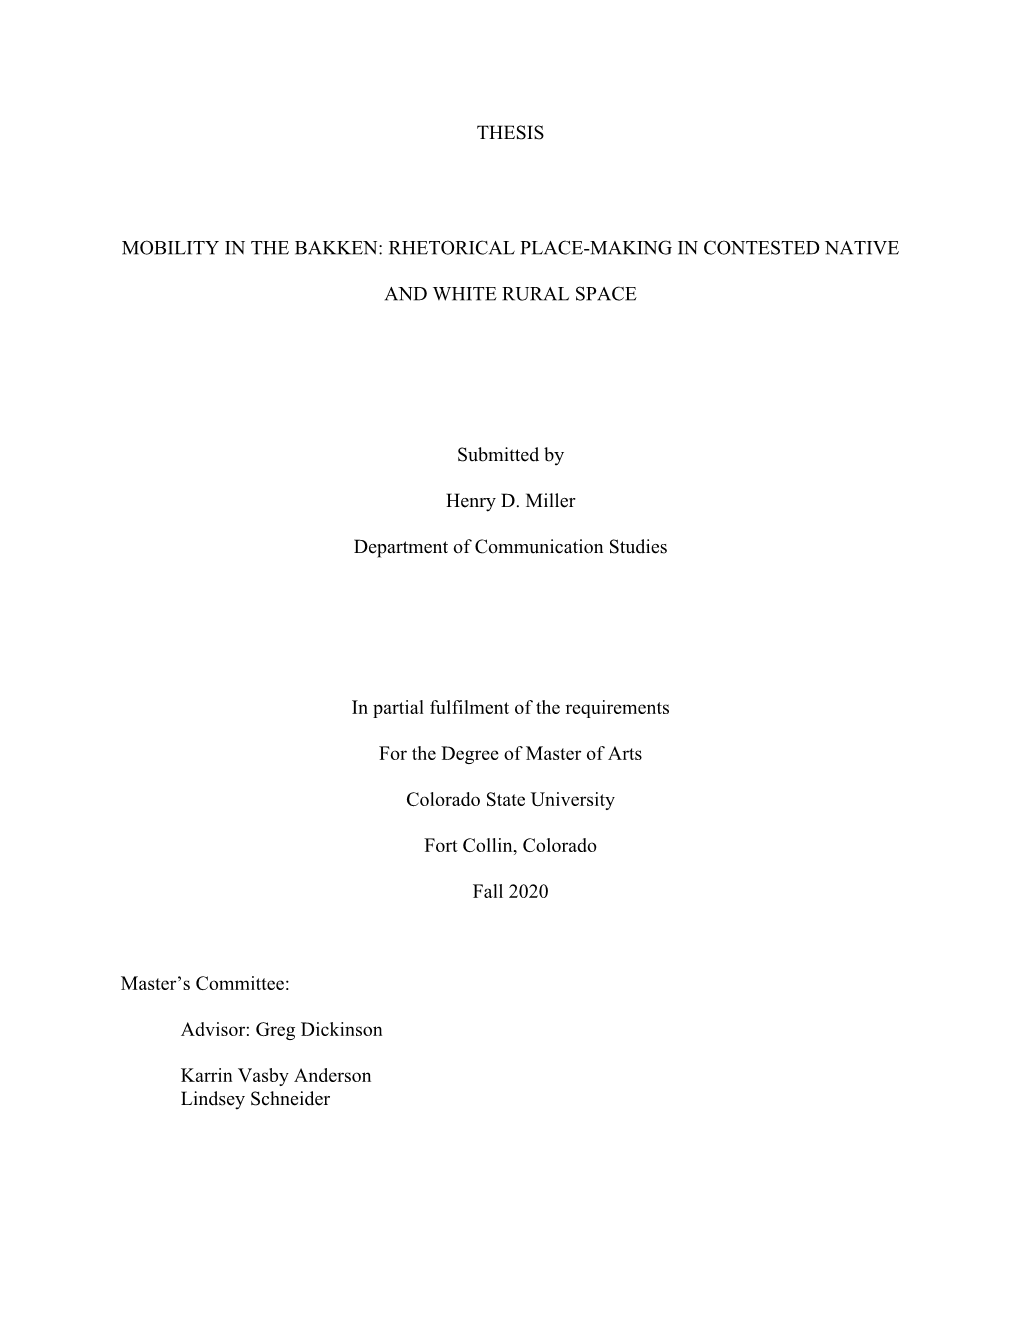 Thesis Mobility in the Bakken: Rhetorical Place-Making In